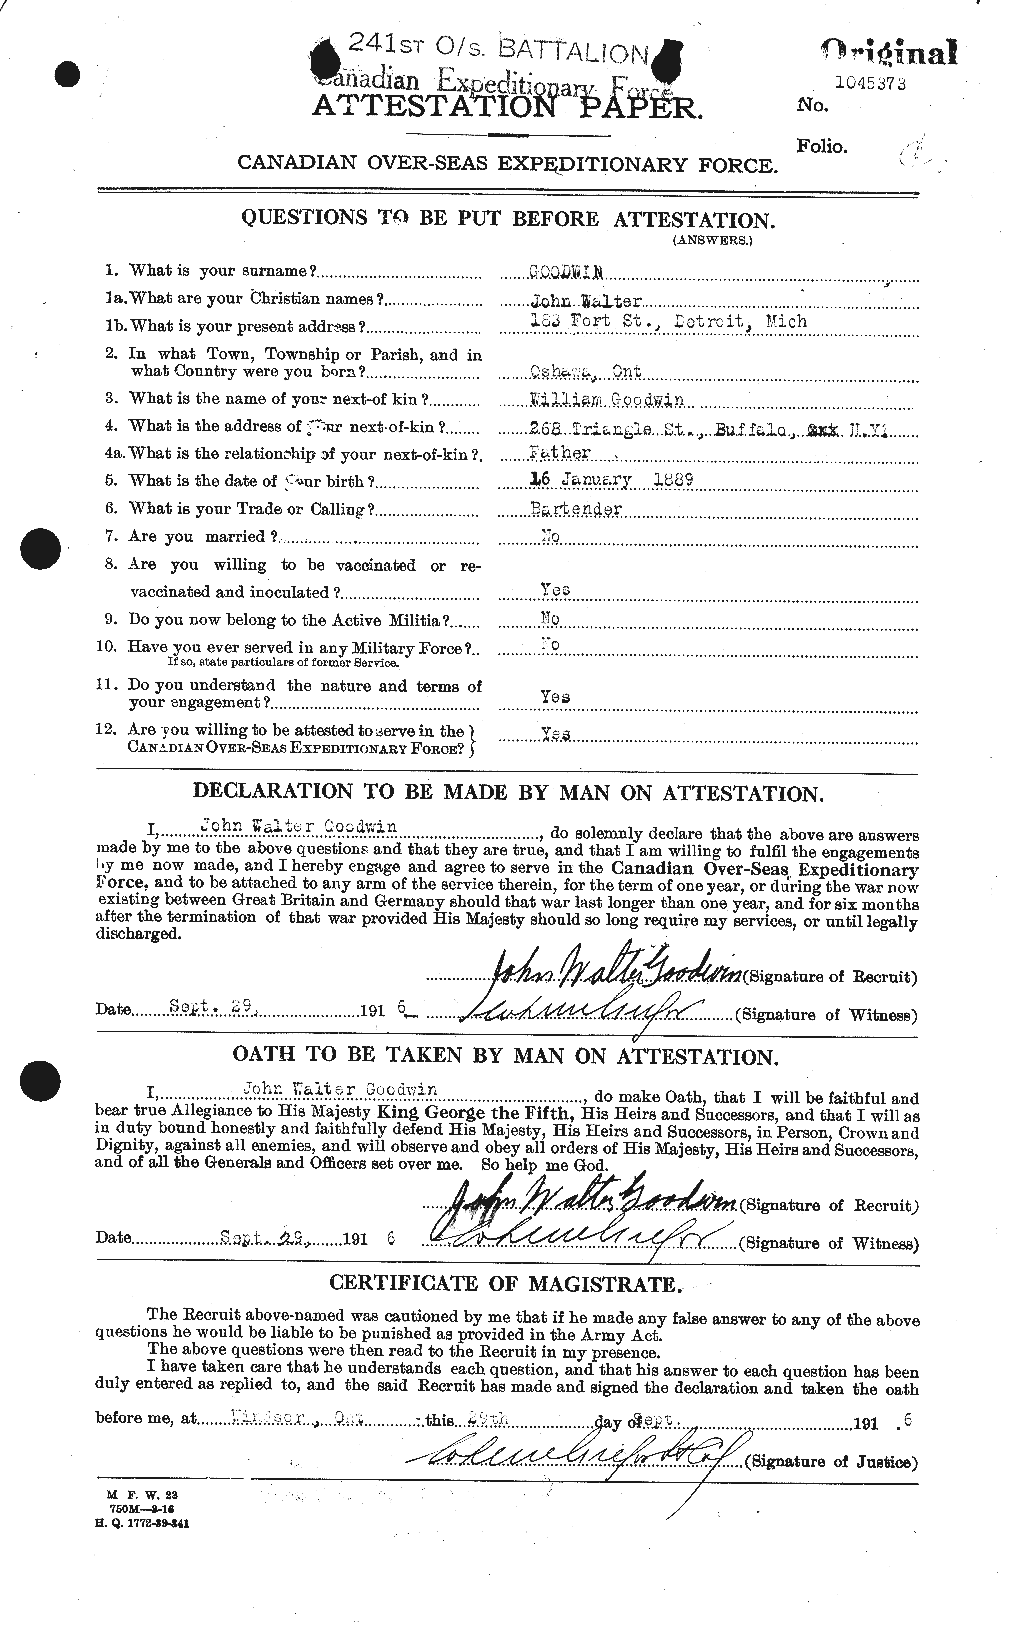 Personnel Records of the First World War - CEF 352686a